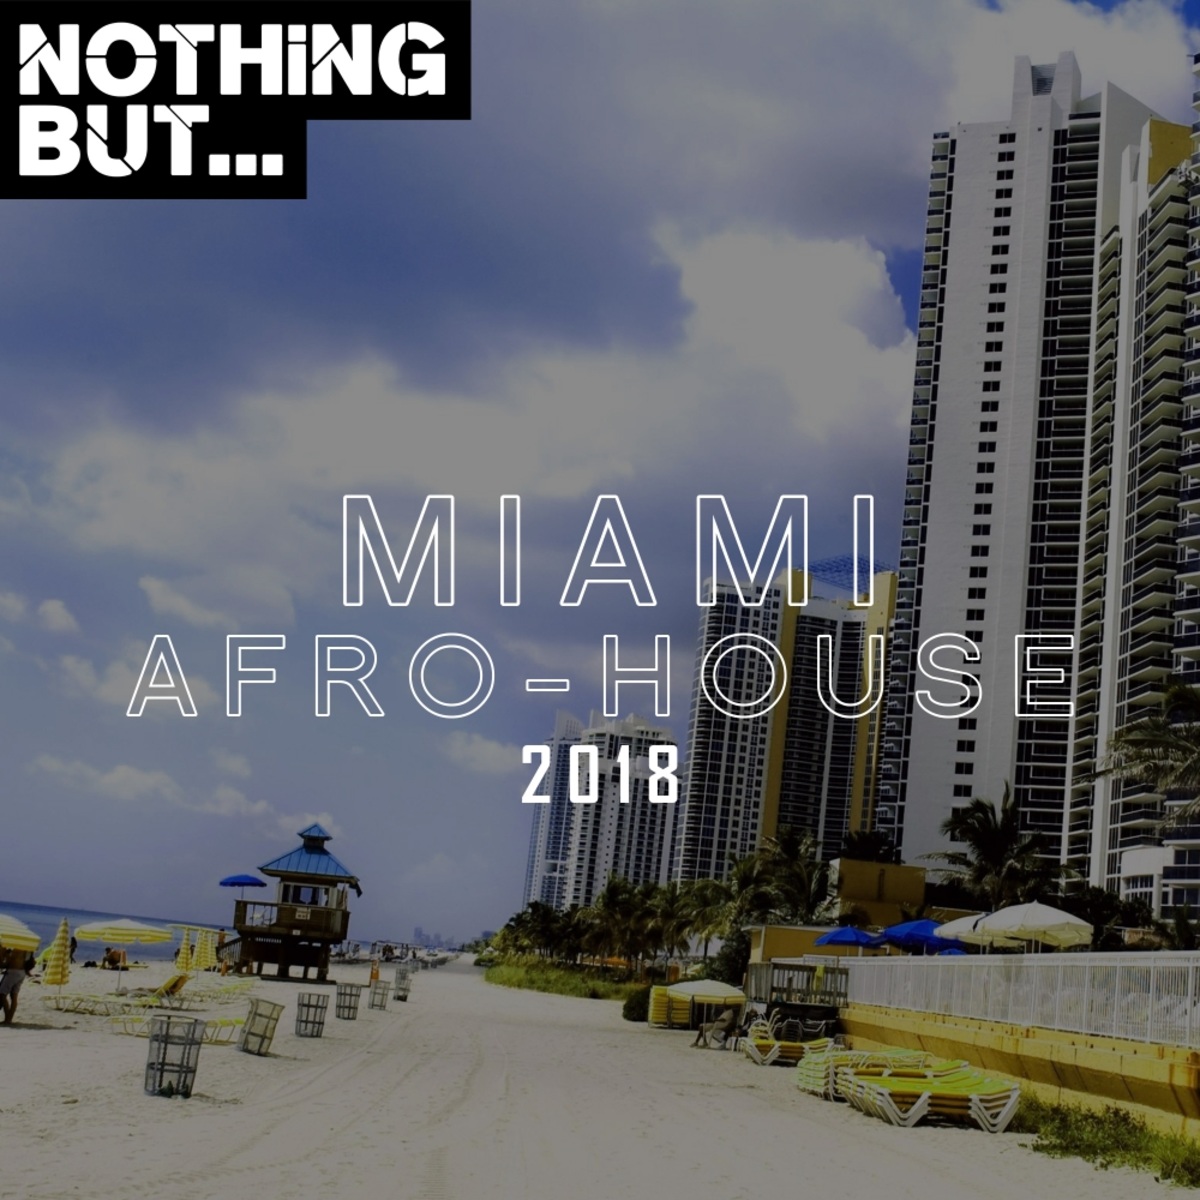 VA - Nothing But... Miami Afro House 2018 / Nothing But